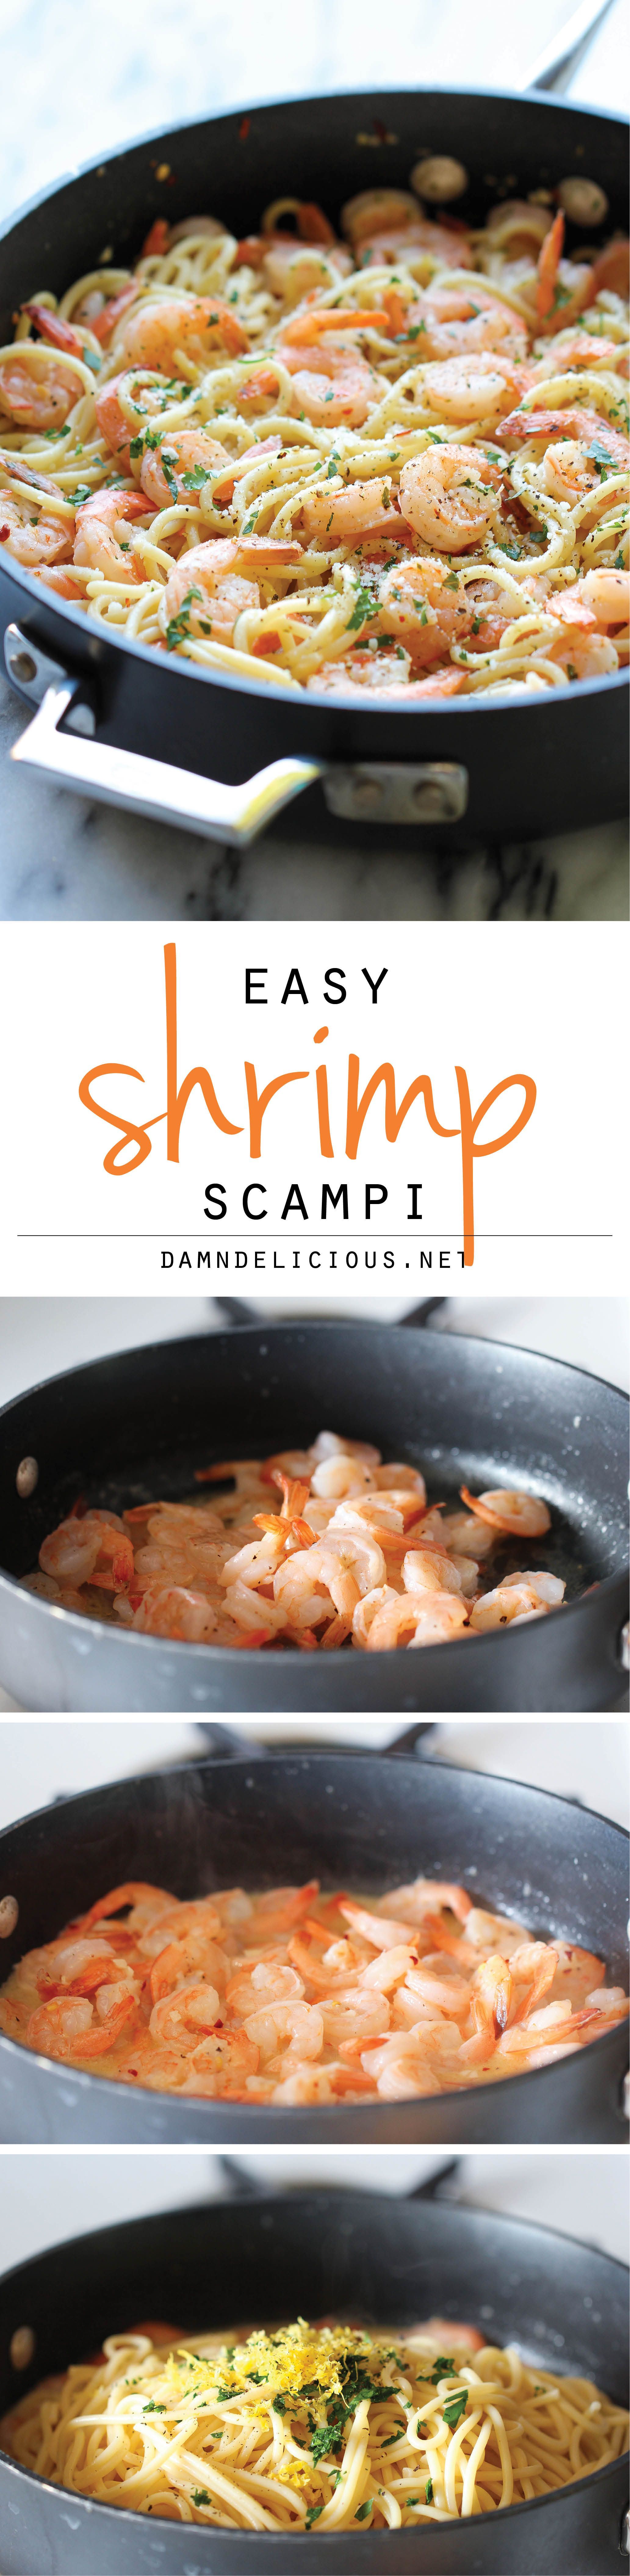 Shrimp Scampi – You wont believe how easy this comes together in just 15 minutes – perfect for those busy weeknights!